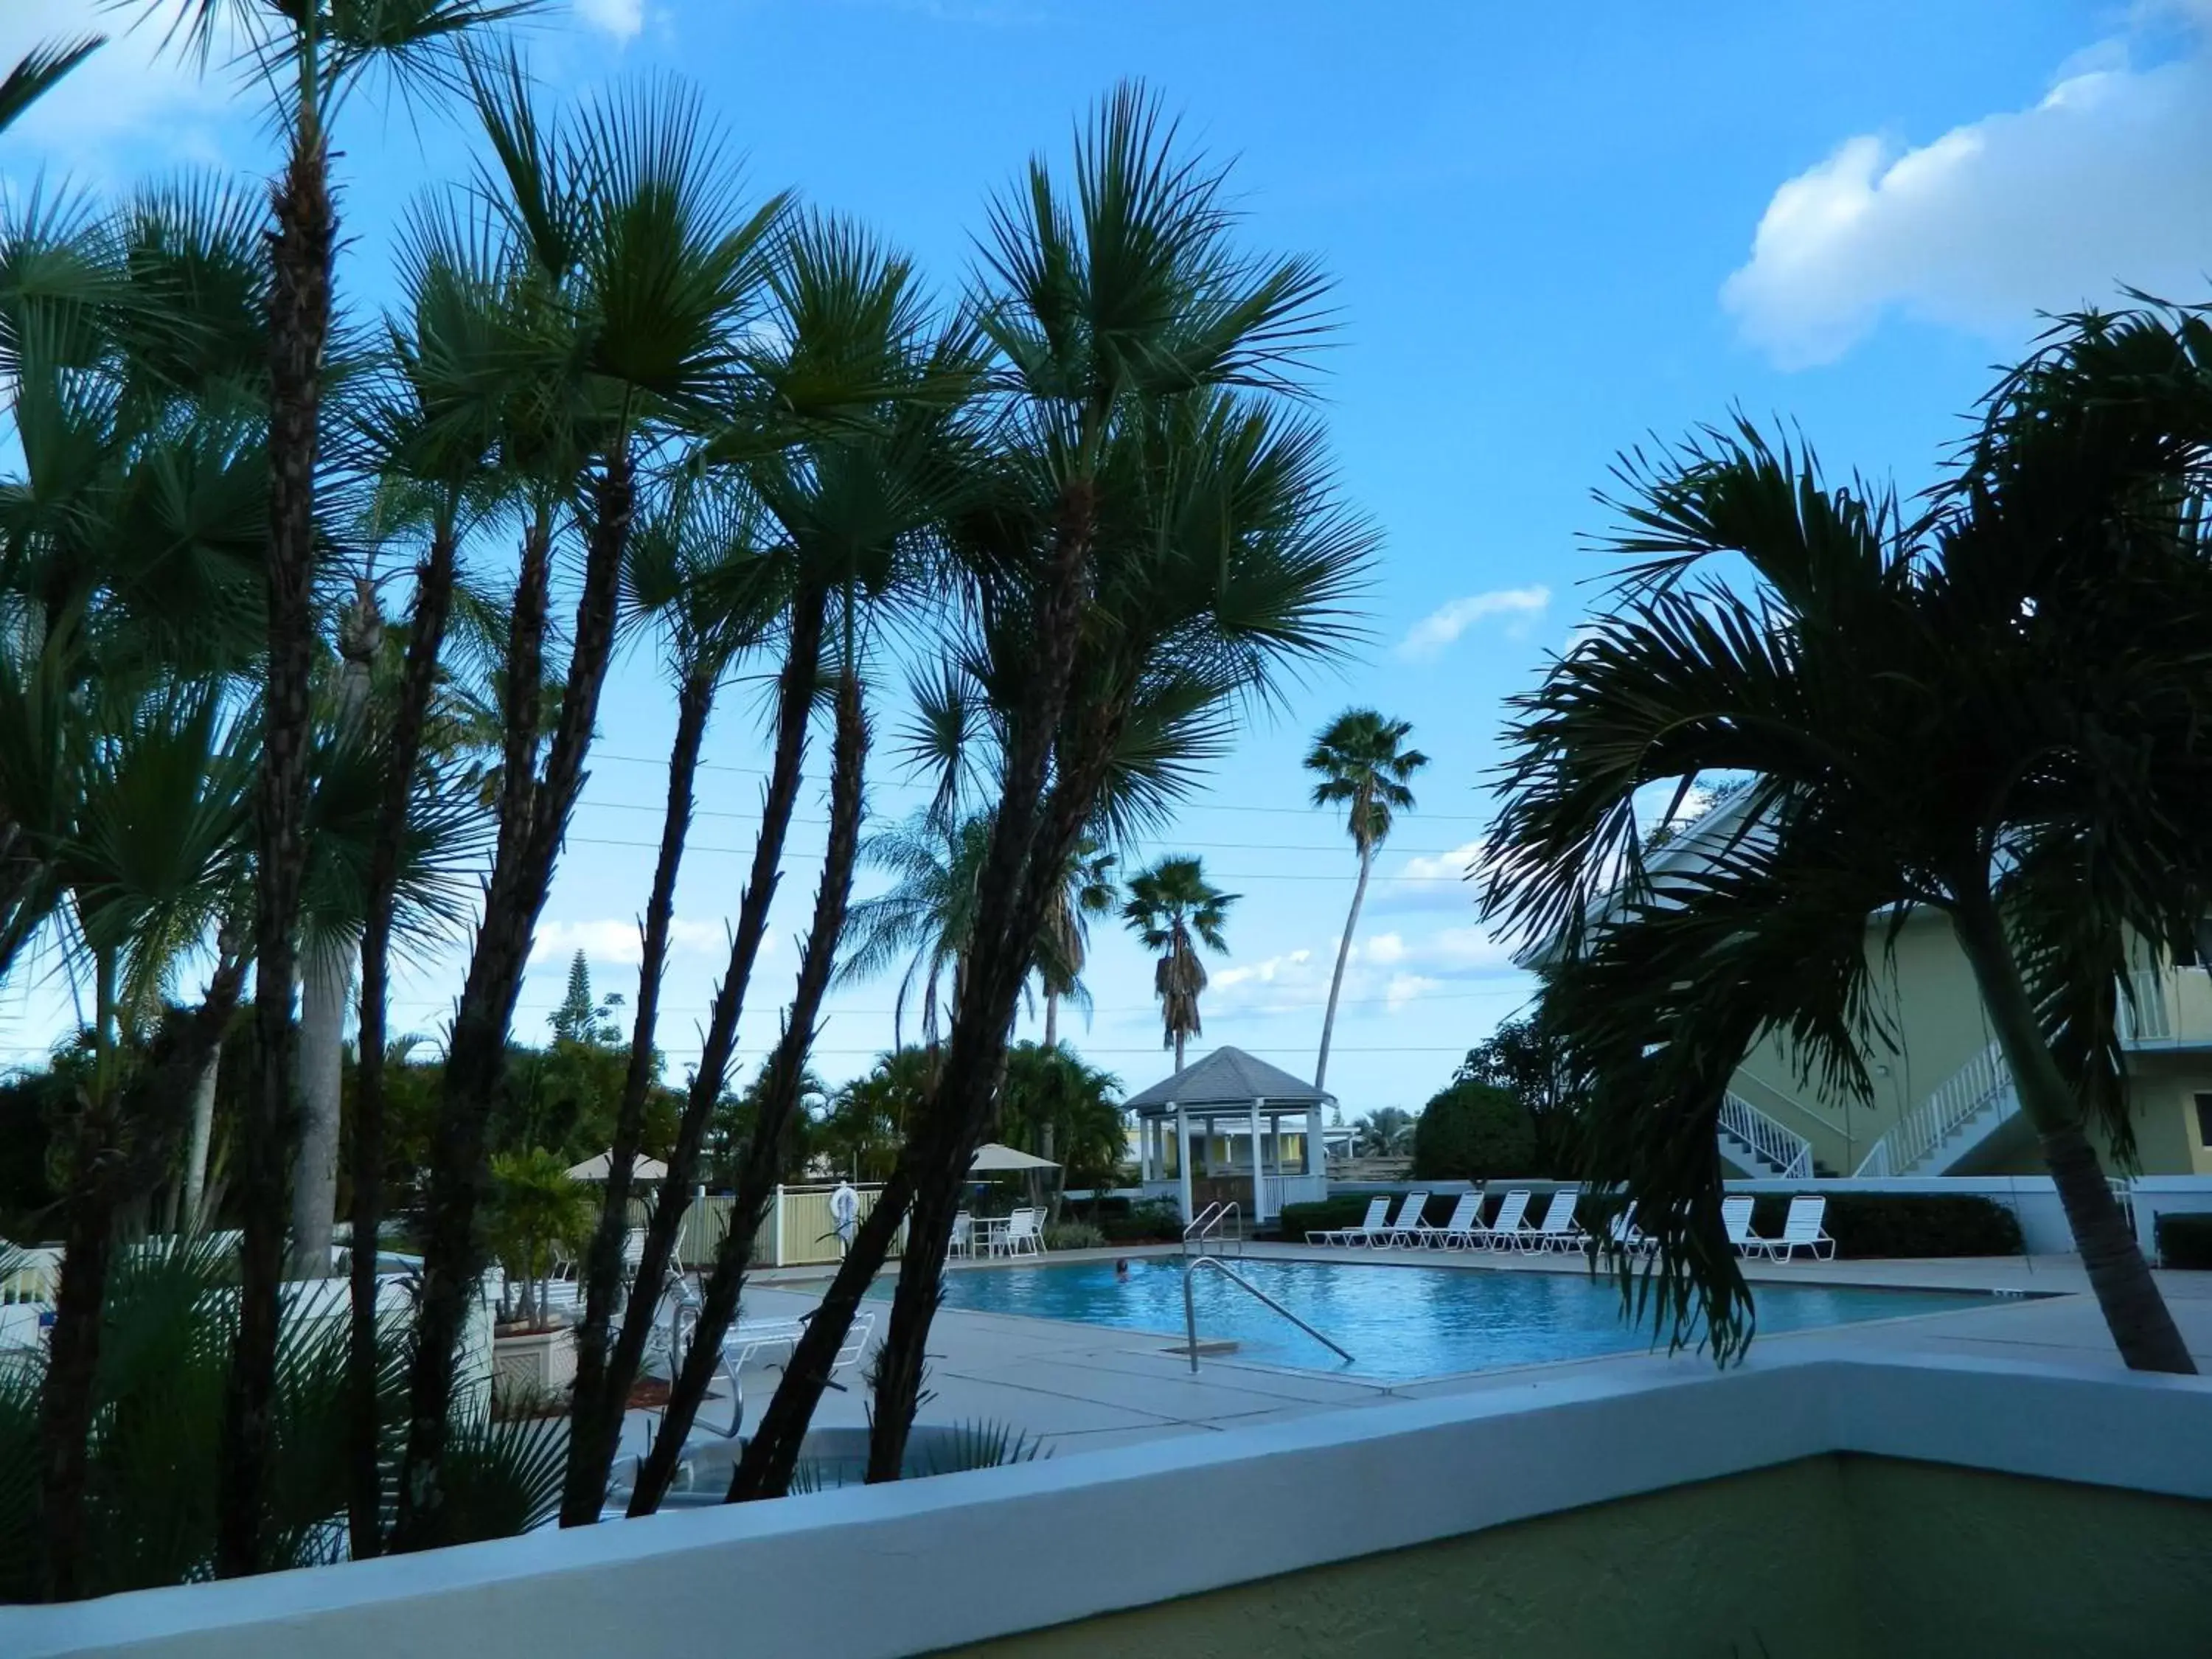 On site, Swimming Pool in Best Western Port St. Lucie